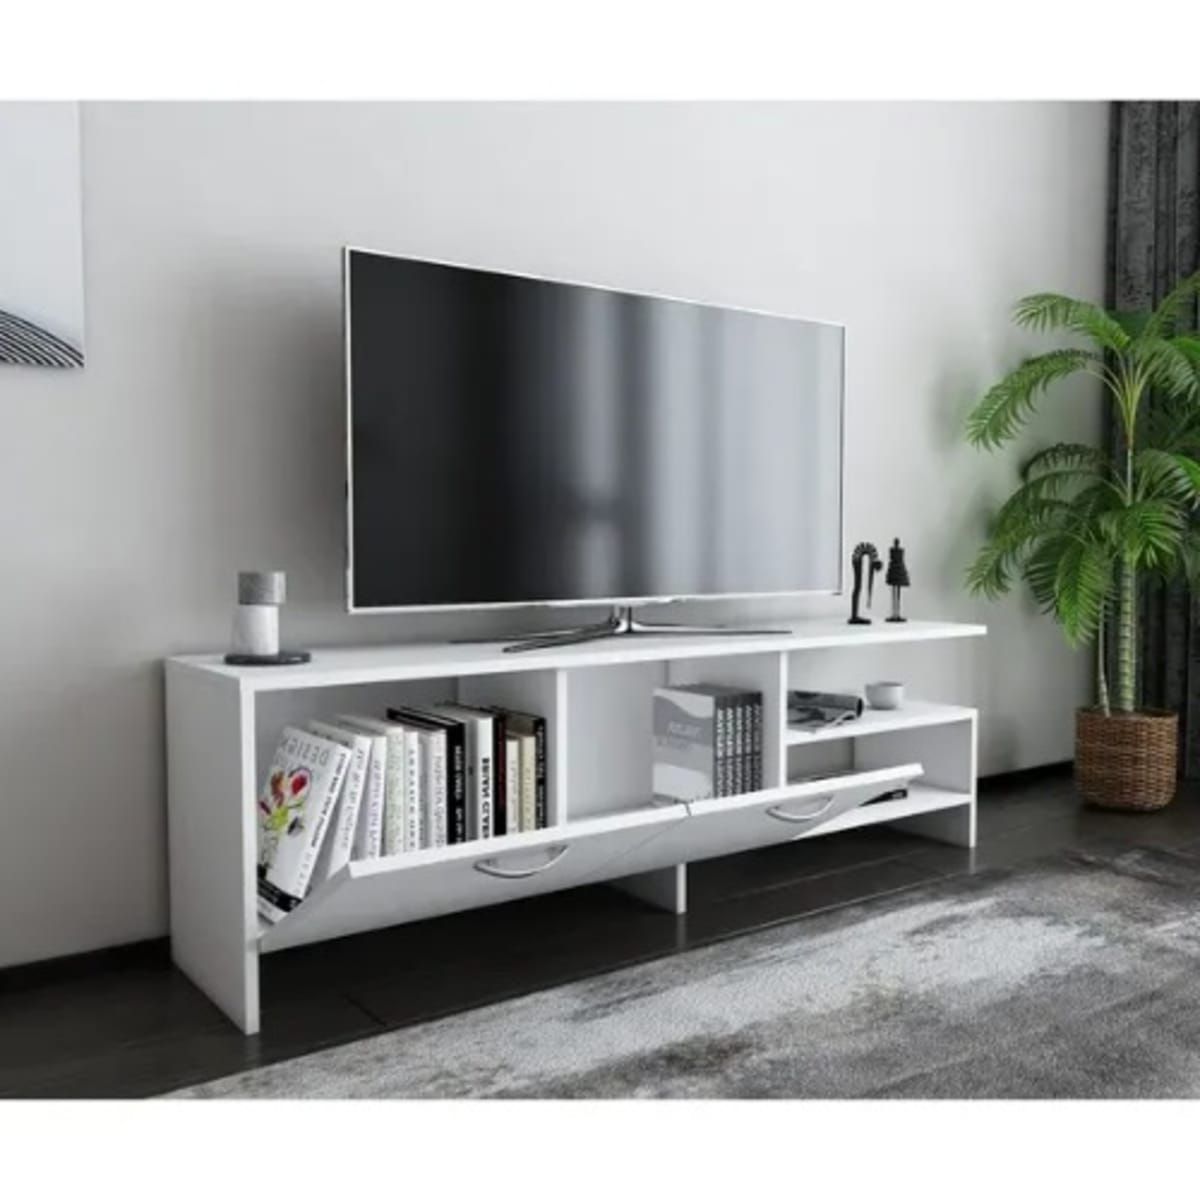 Modern Tv Stand Modern With Storage – White | Konga Online Shopping Within Modern Stands With Shelves (Gallery 13 of 20)